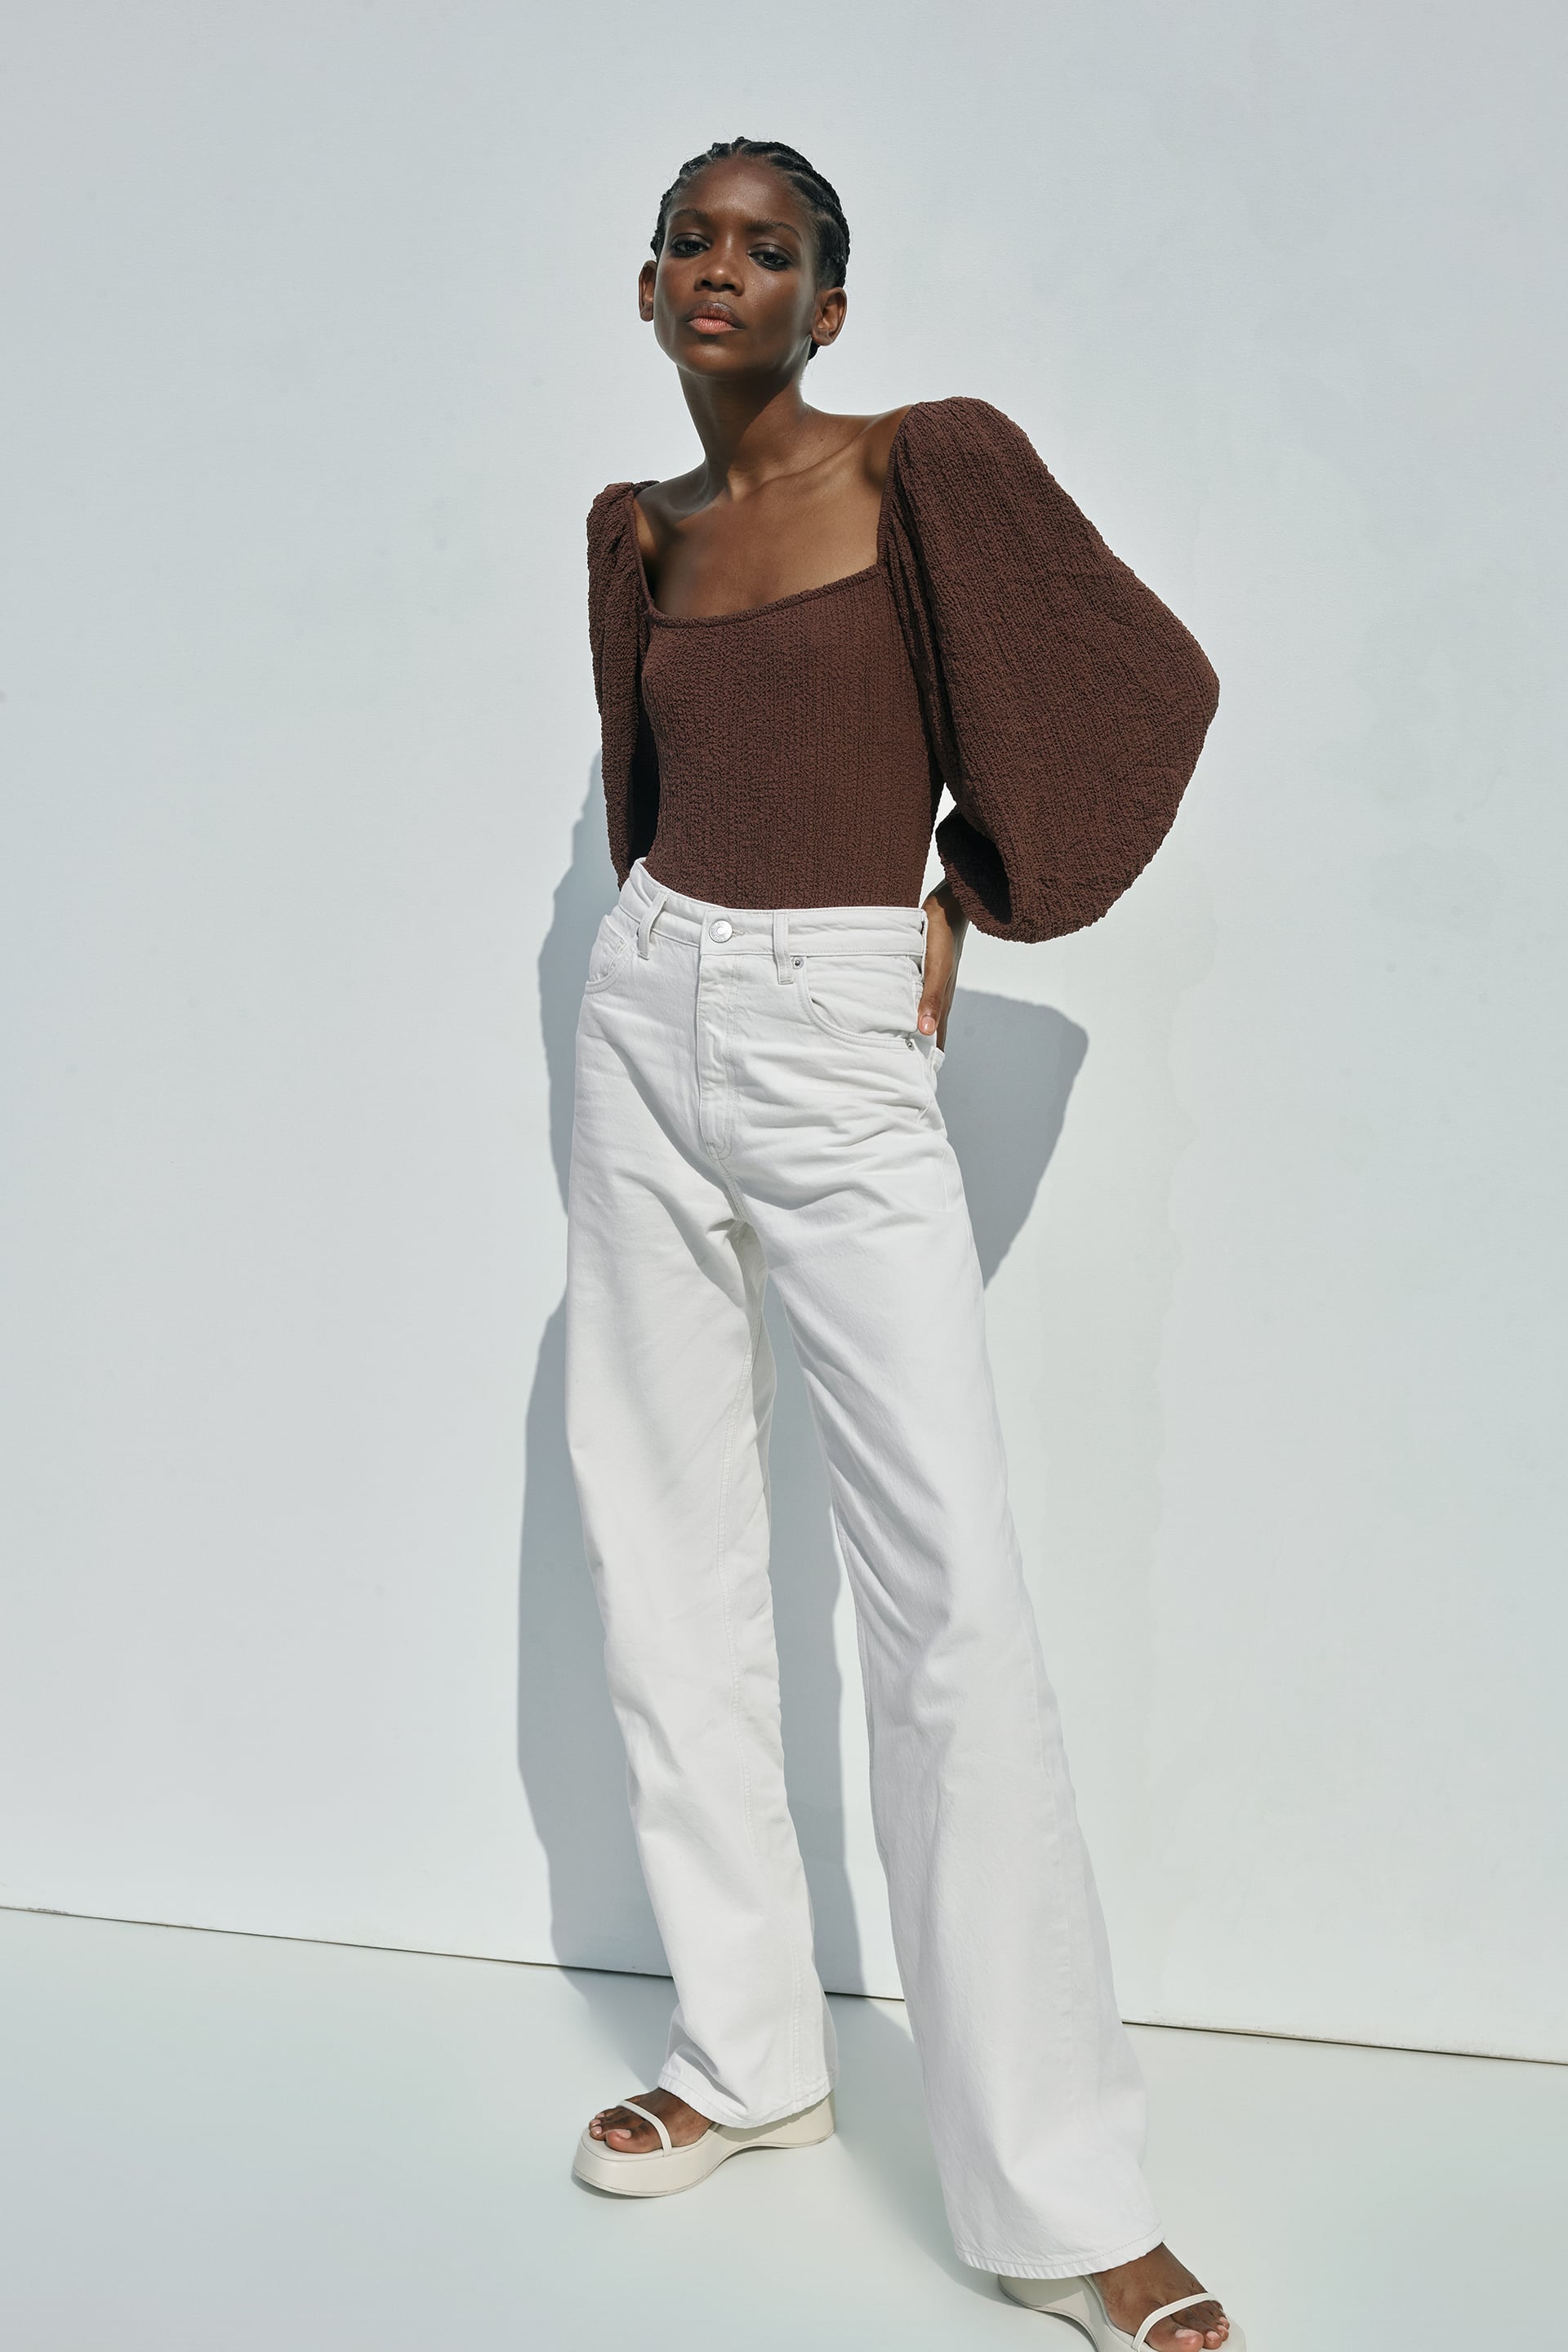 Zara Autumn Colours: 5 Hues the Brand Is Backing This Season | Who What ...